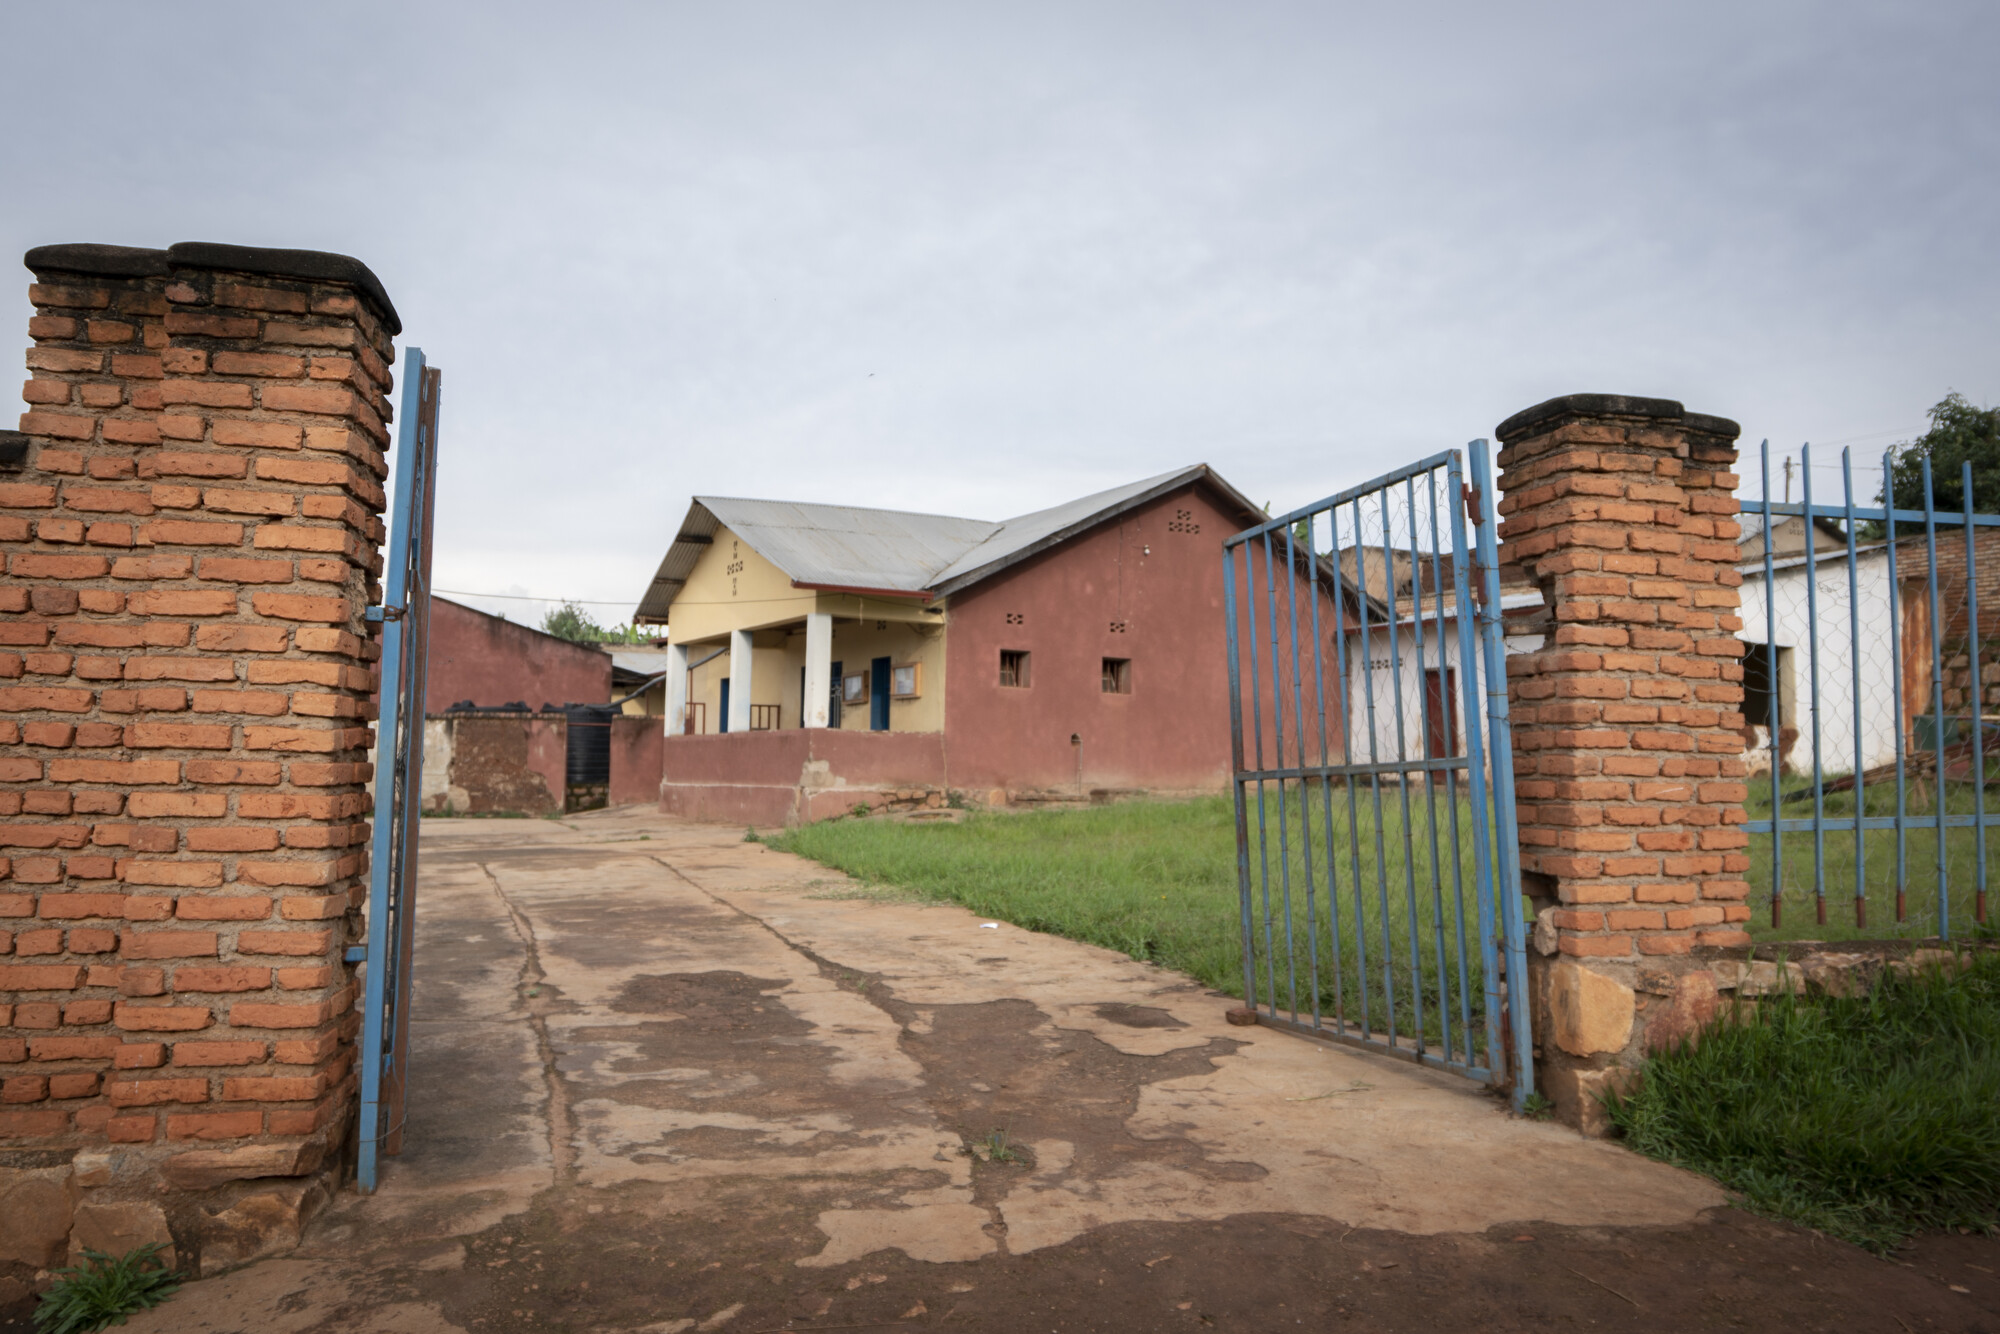 A view of a single storey residential building in Rwanda from outside the gates